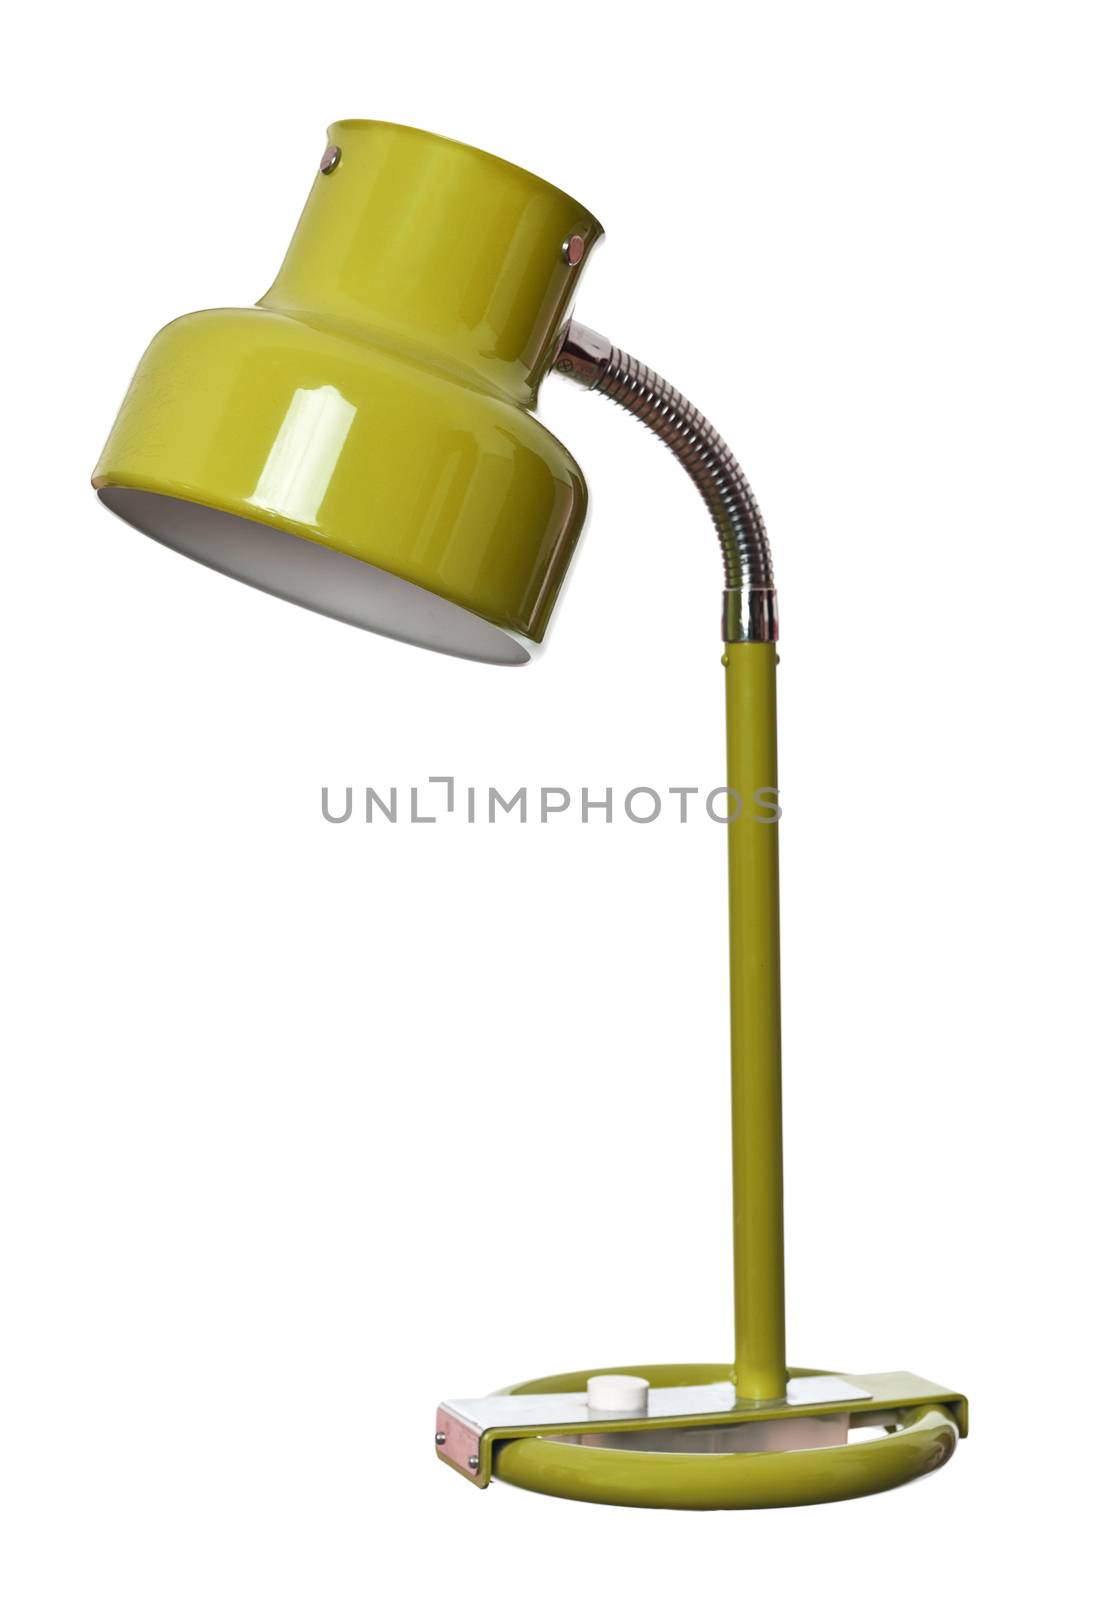 Vintage Yellow lamp isolated on a white background